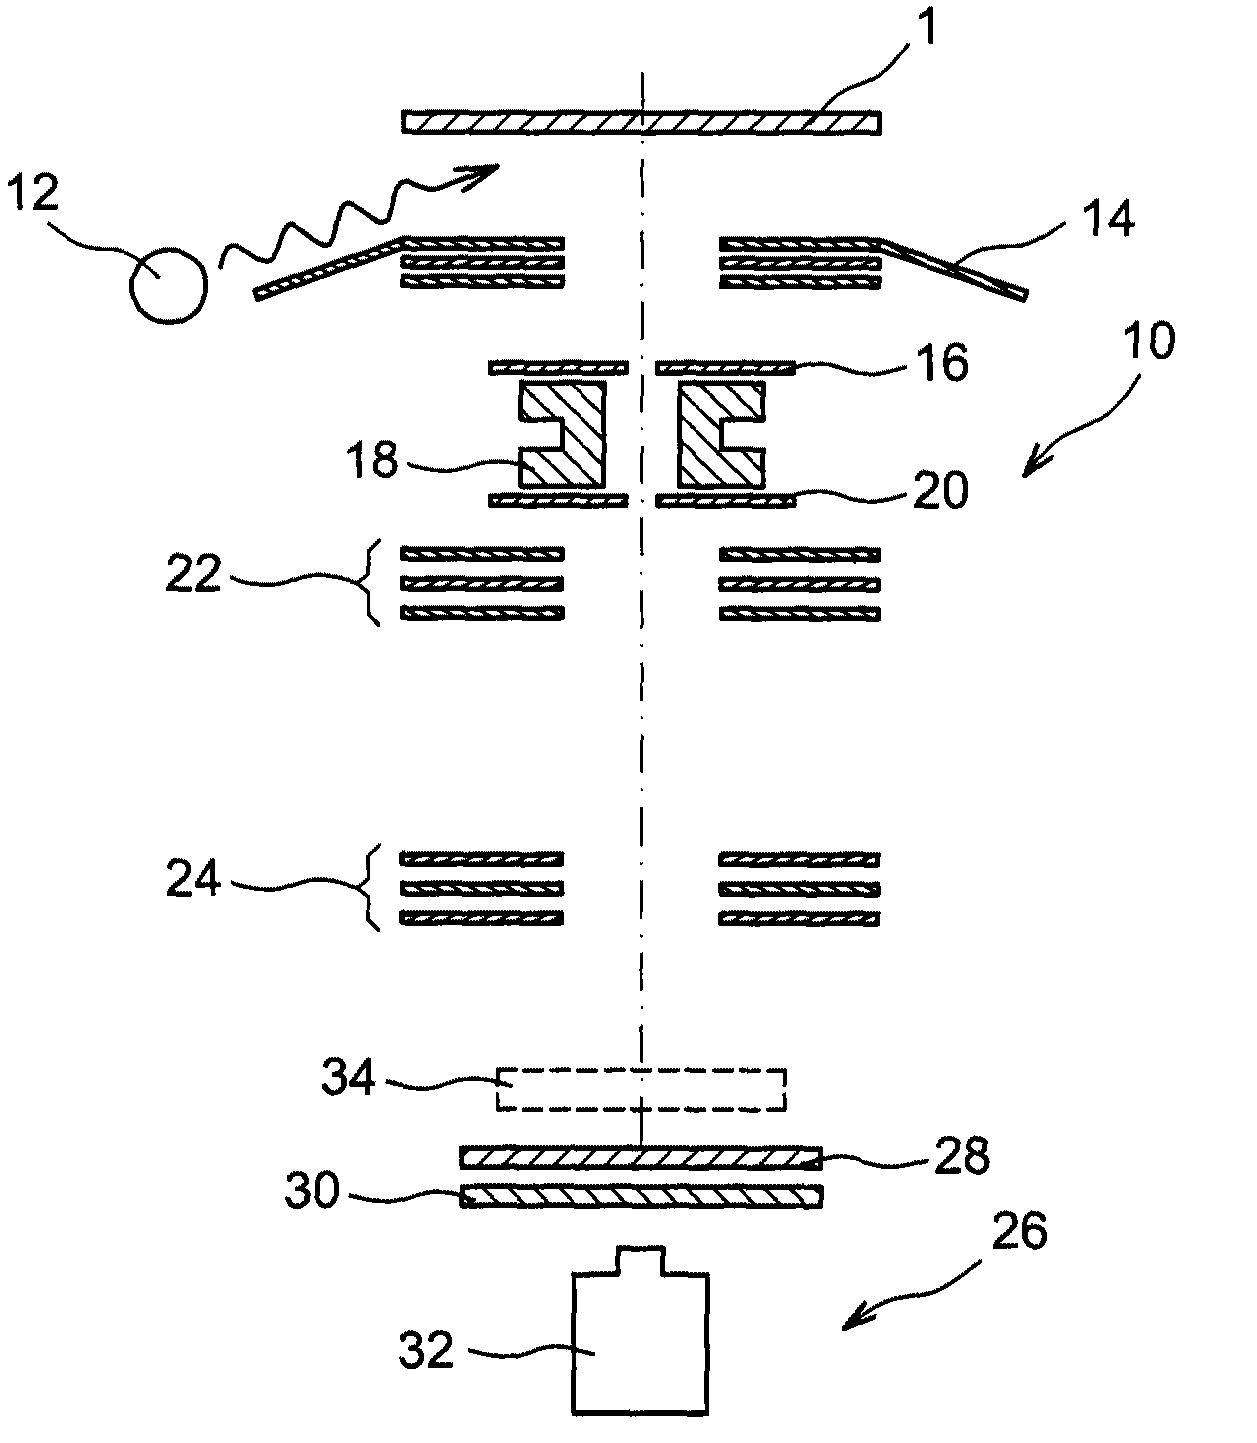 Method for correcting astigmatism in electron emission spectromicroscopy imaging